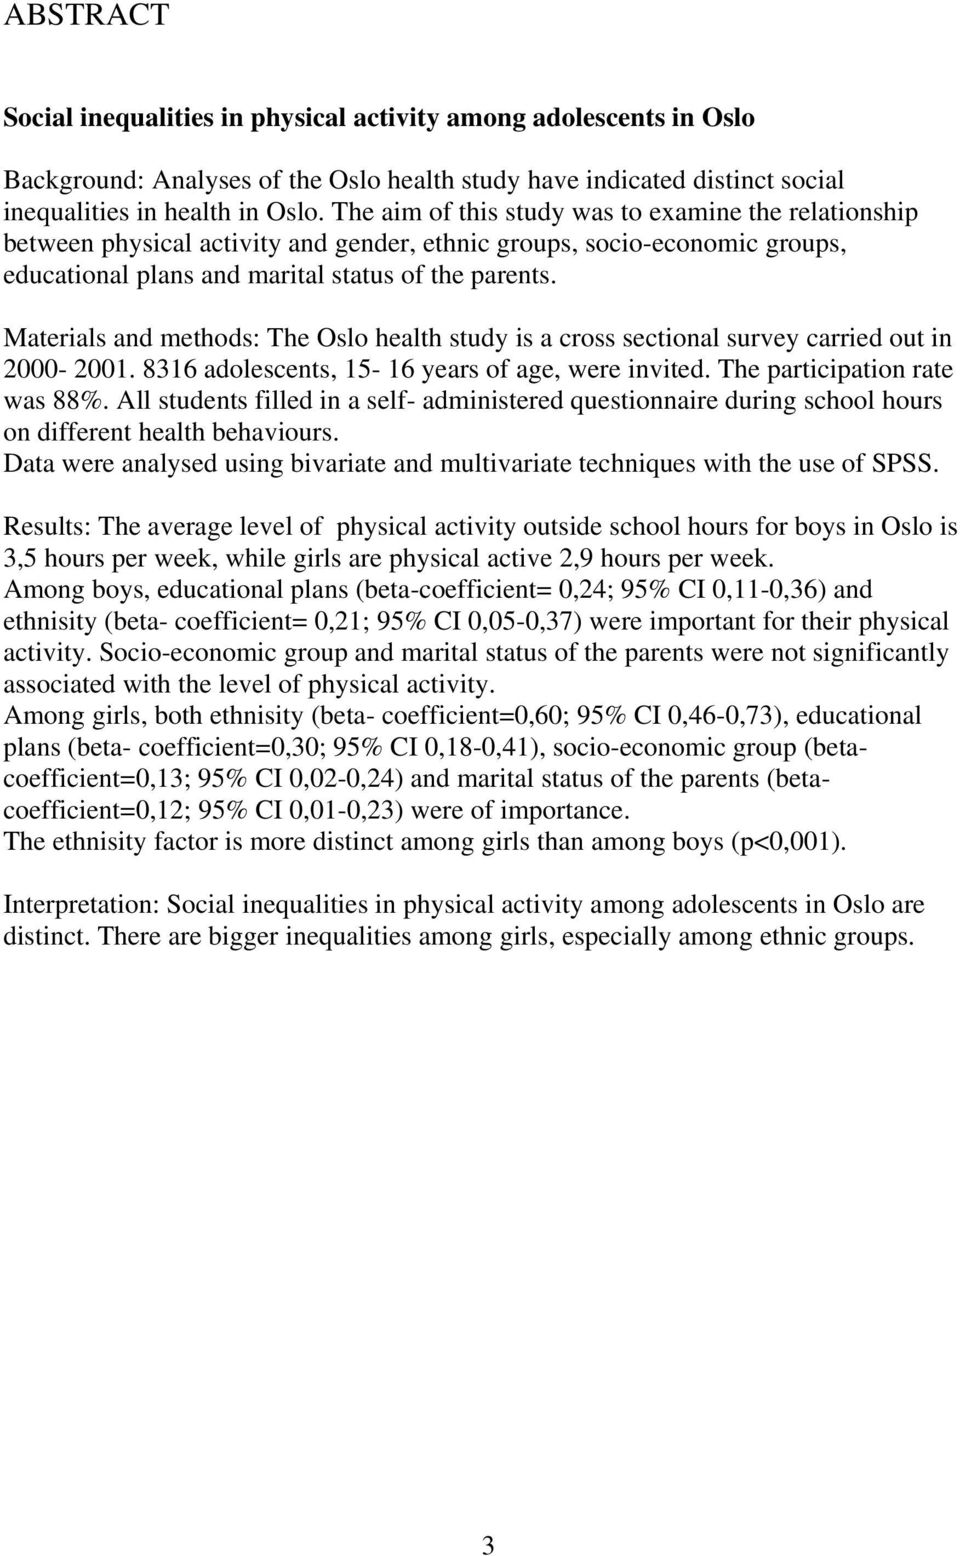 Materials and methods: The Oslo health study is a cross sectional survey carried out in 2000-2001. 8316 adolescents, 15-16 years of age, were invited. The participation rate was 88%.